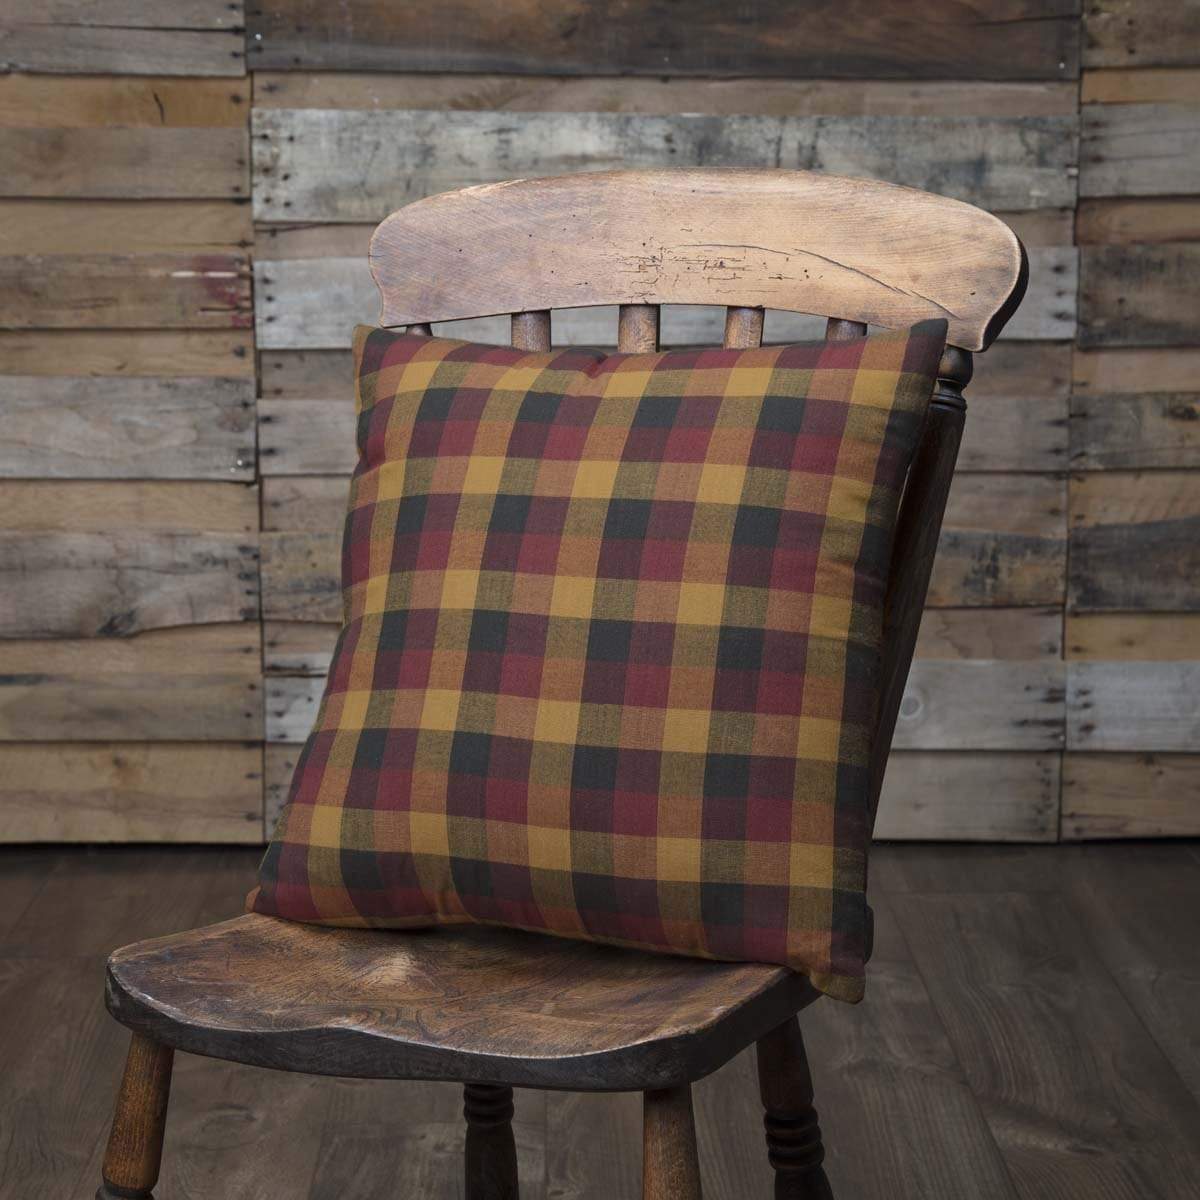 Heritage Farms Primitive House Pillow 18 inch